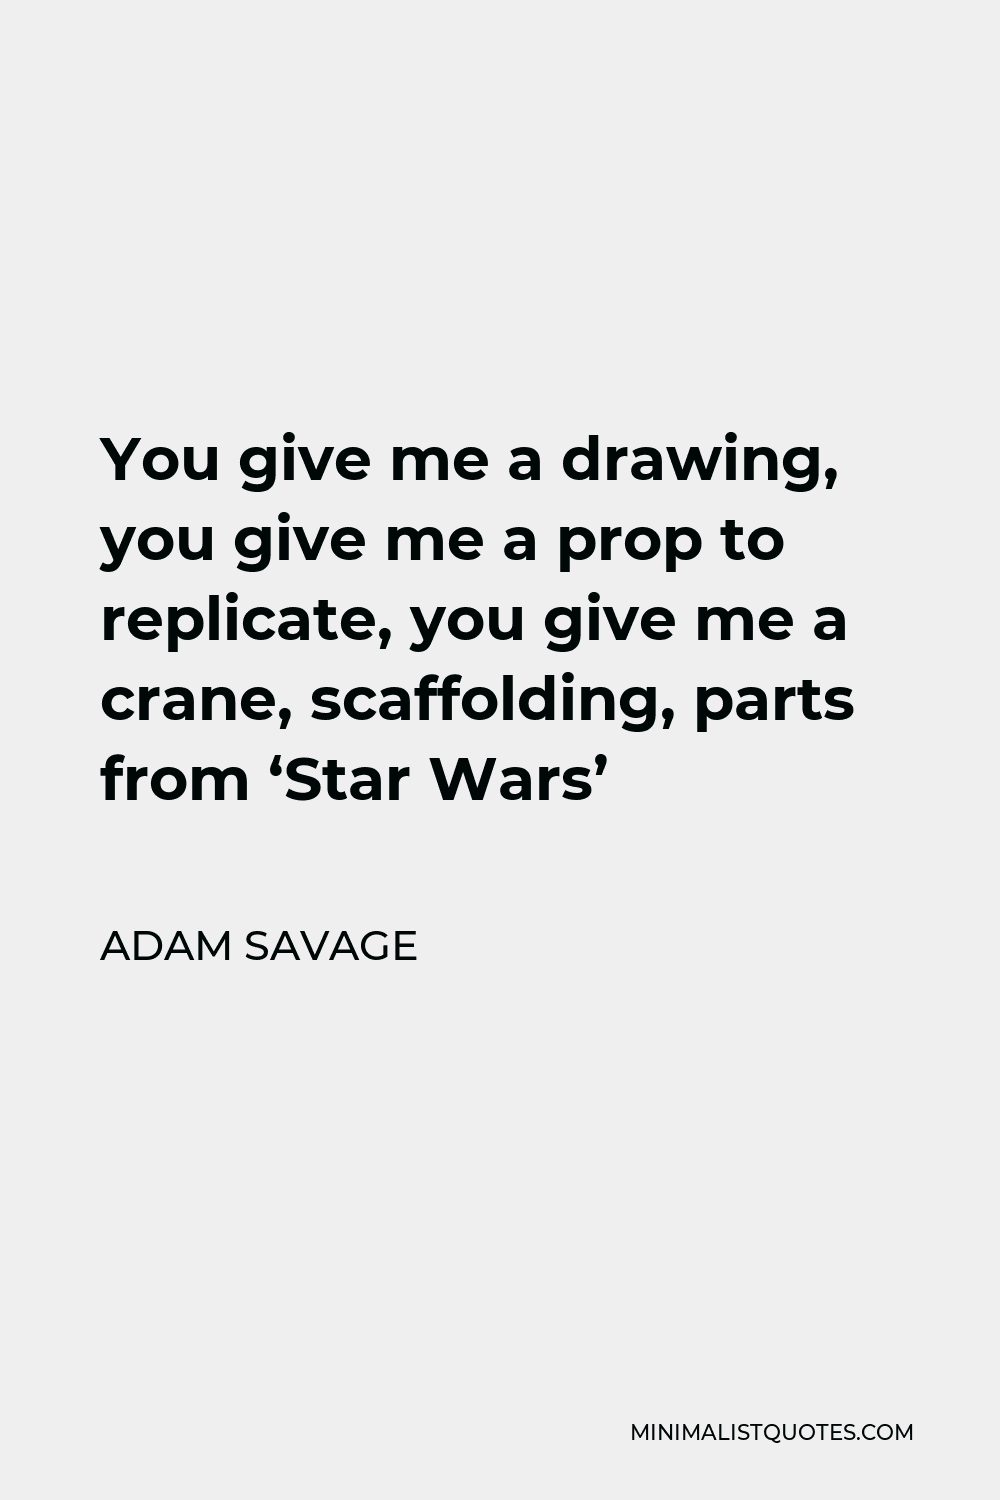 Adam Savage Quote - You give me a drawing, you give me a prop to replicate, you give me a crane, scaffolding, parts from ‘Star Wars’